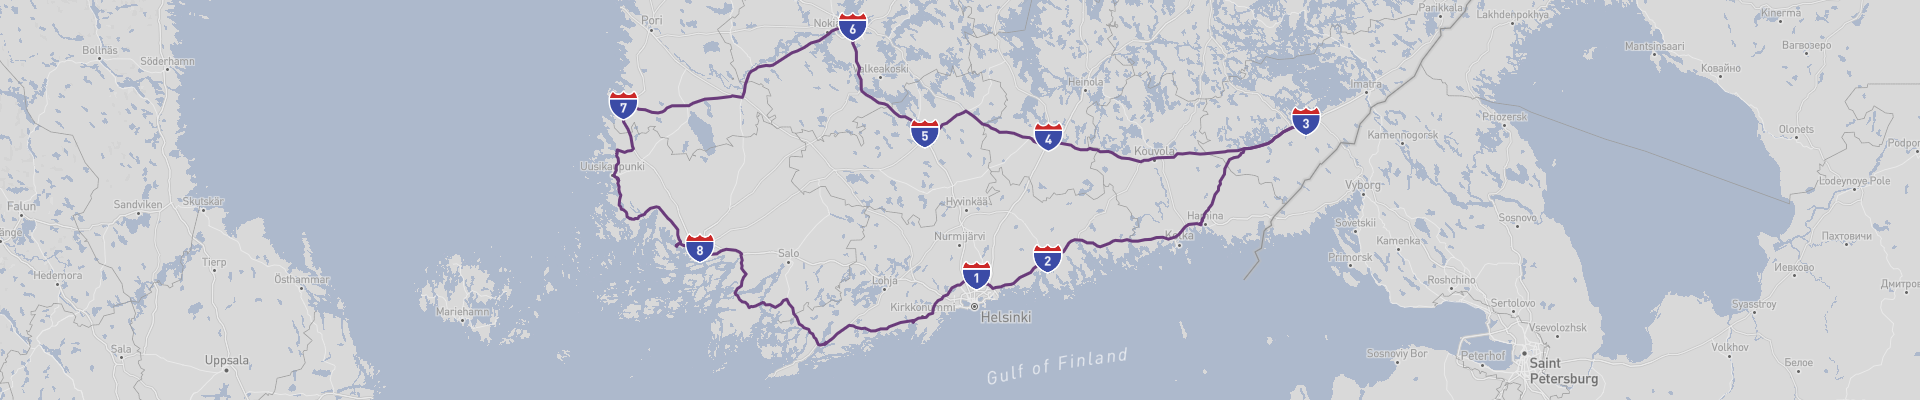 Southern Finland Road Trip